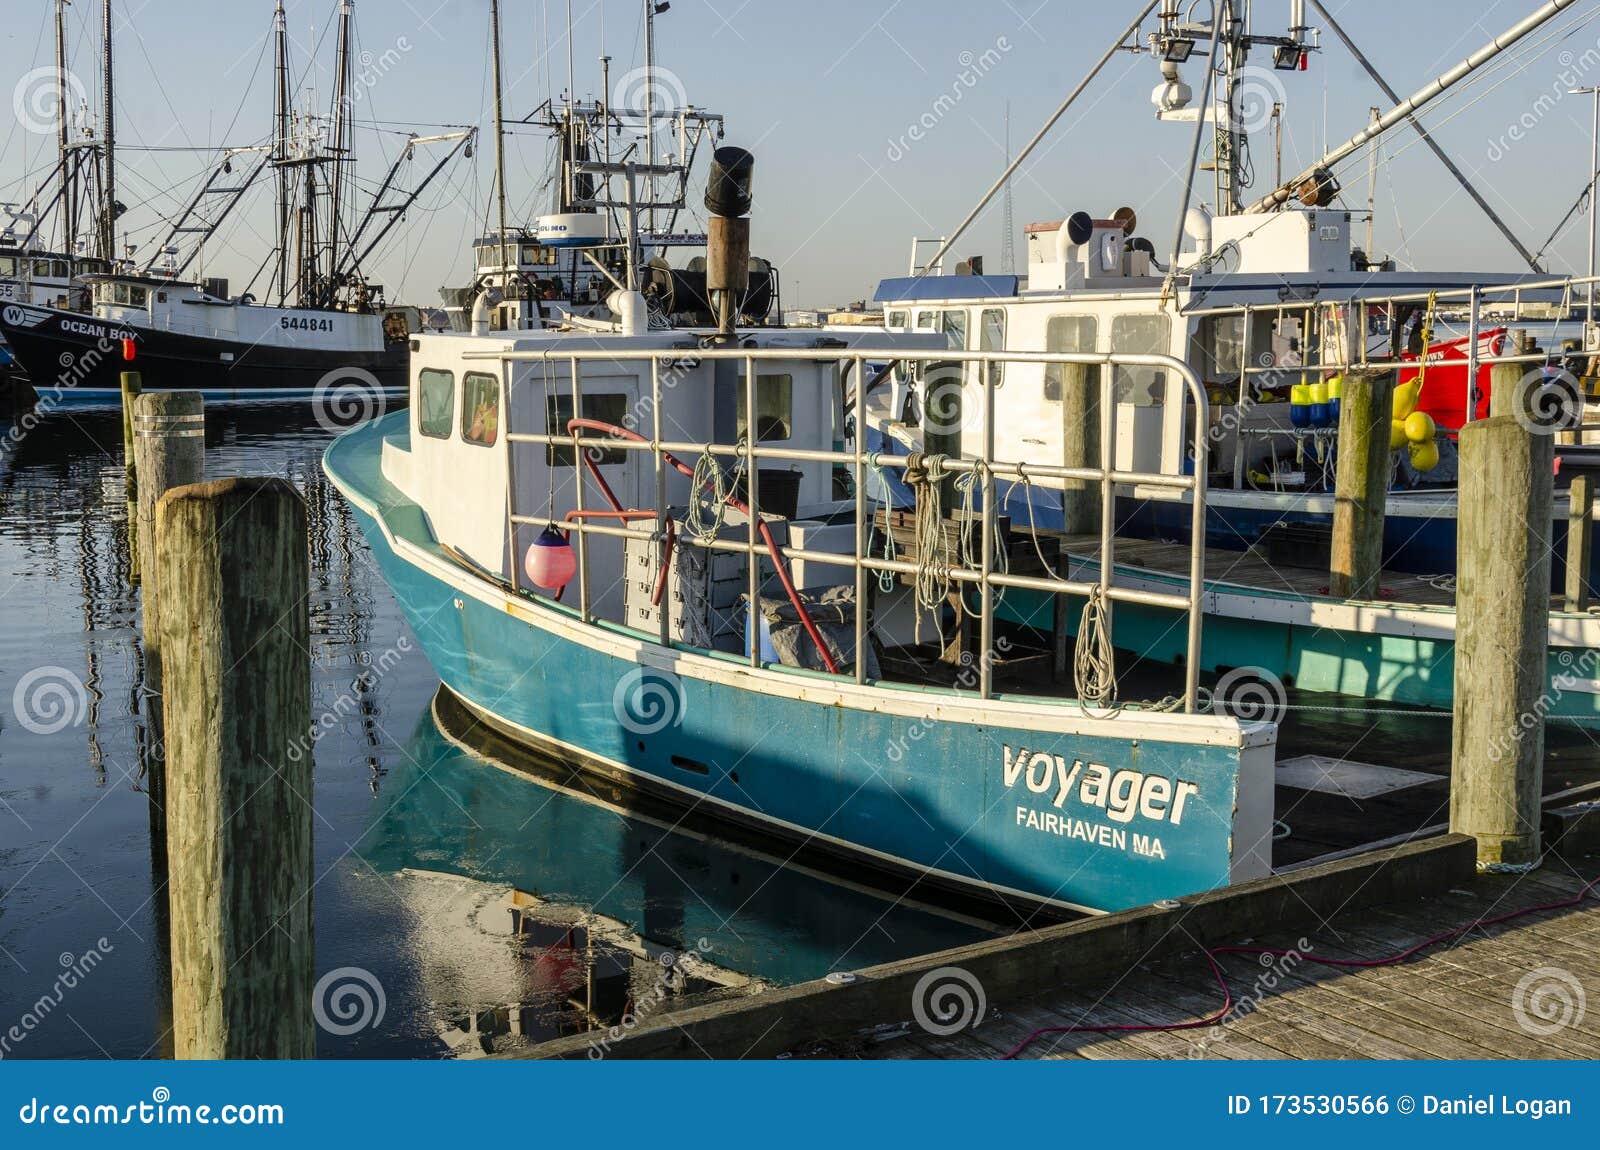 Commercial Fishing Boat Voyager Reflected In Skim Of Ice Near Docks Editorial Photo - Image of ...